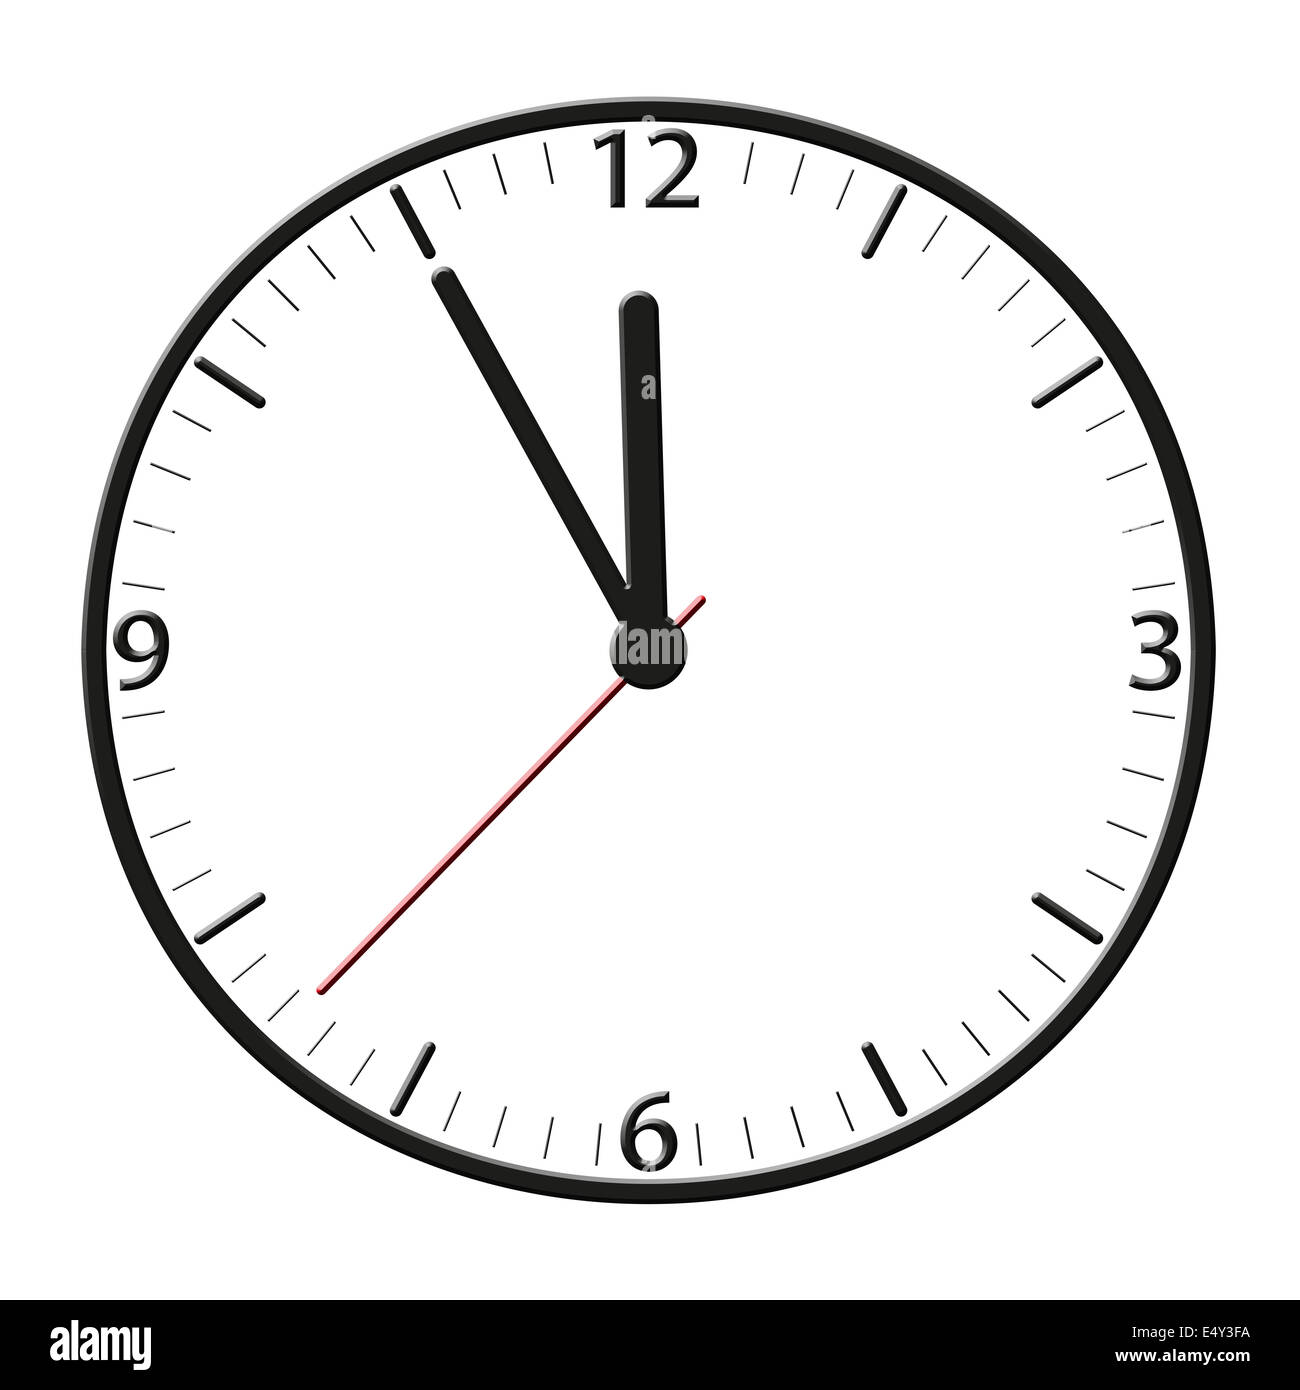 5 Vor 12 Uhr High Resolution Stock Photography and Images - Alamy